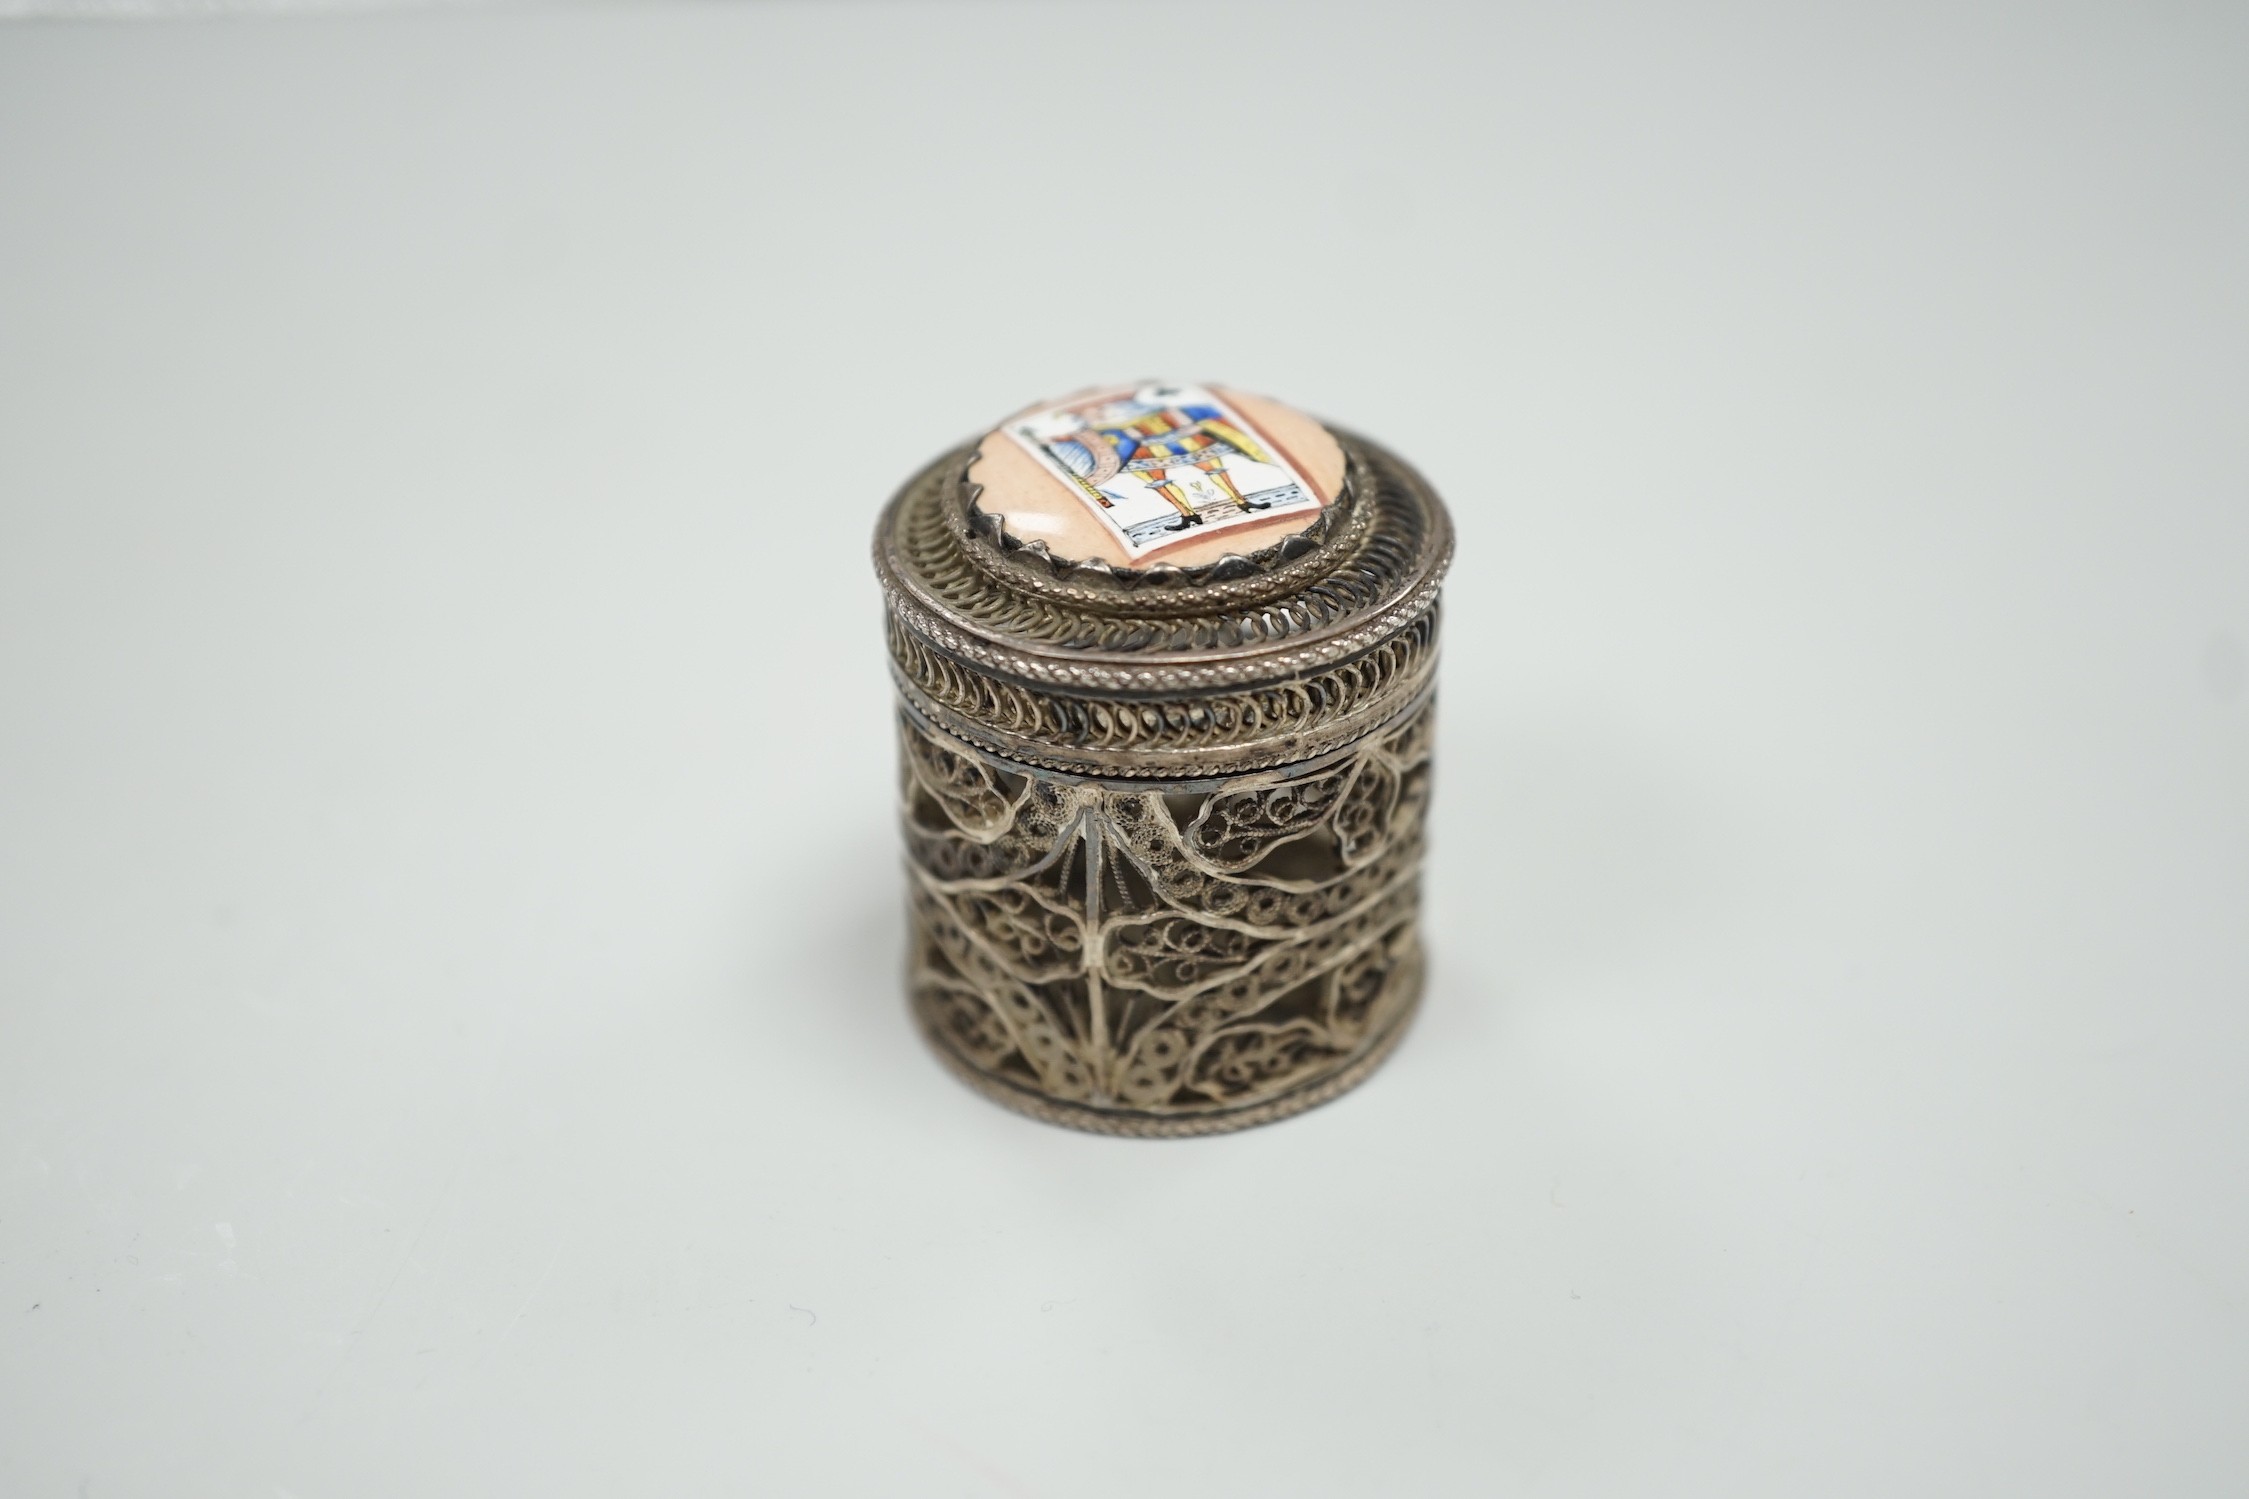 A continental filigree white metal and enamelled cylindrical pill box, the cover enamelled with a picture playing card, height 32mm.